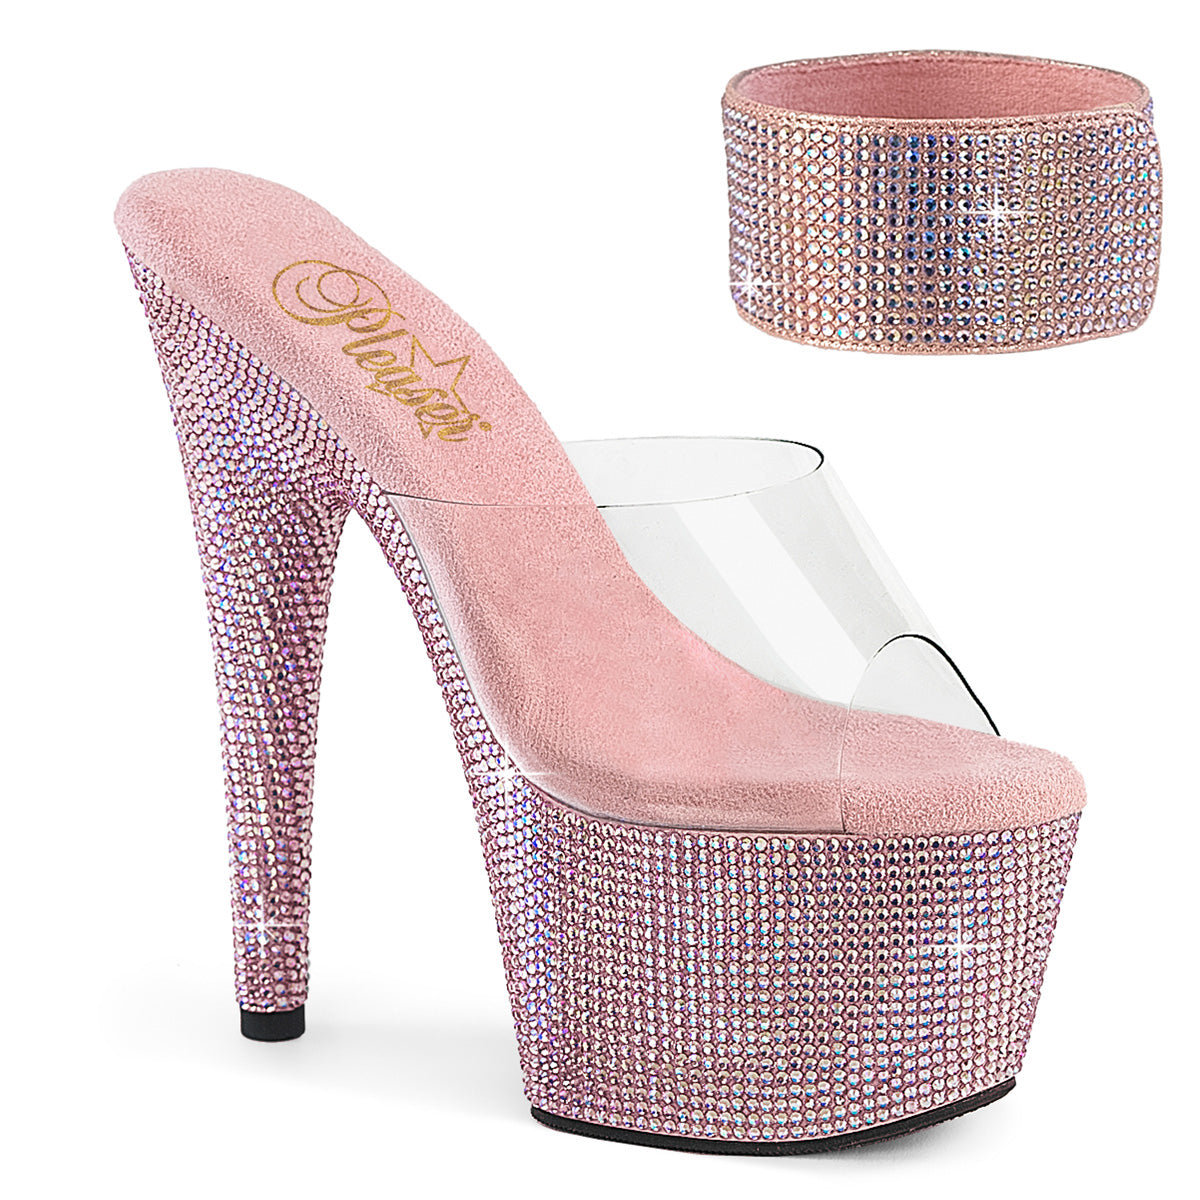 BEJEWELED-712RS Clear & Multi Colour Peep Toe High Heel Pink Multi view 1